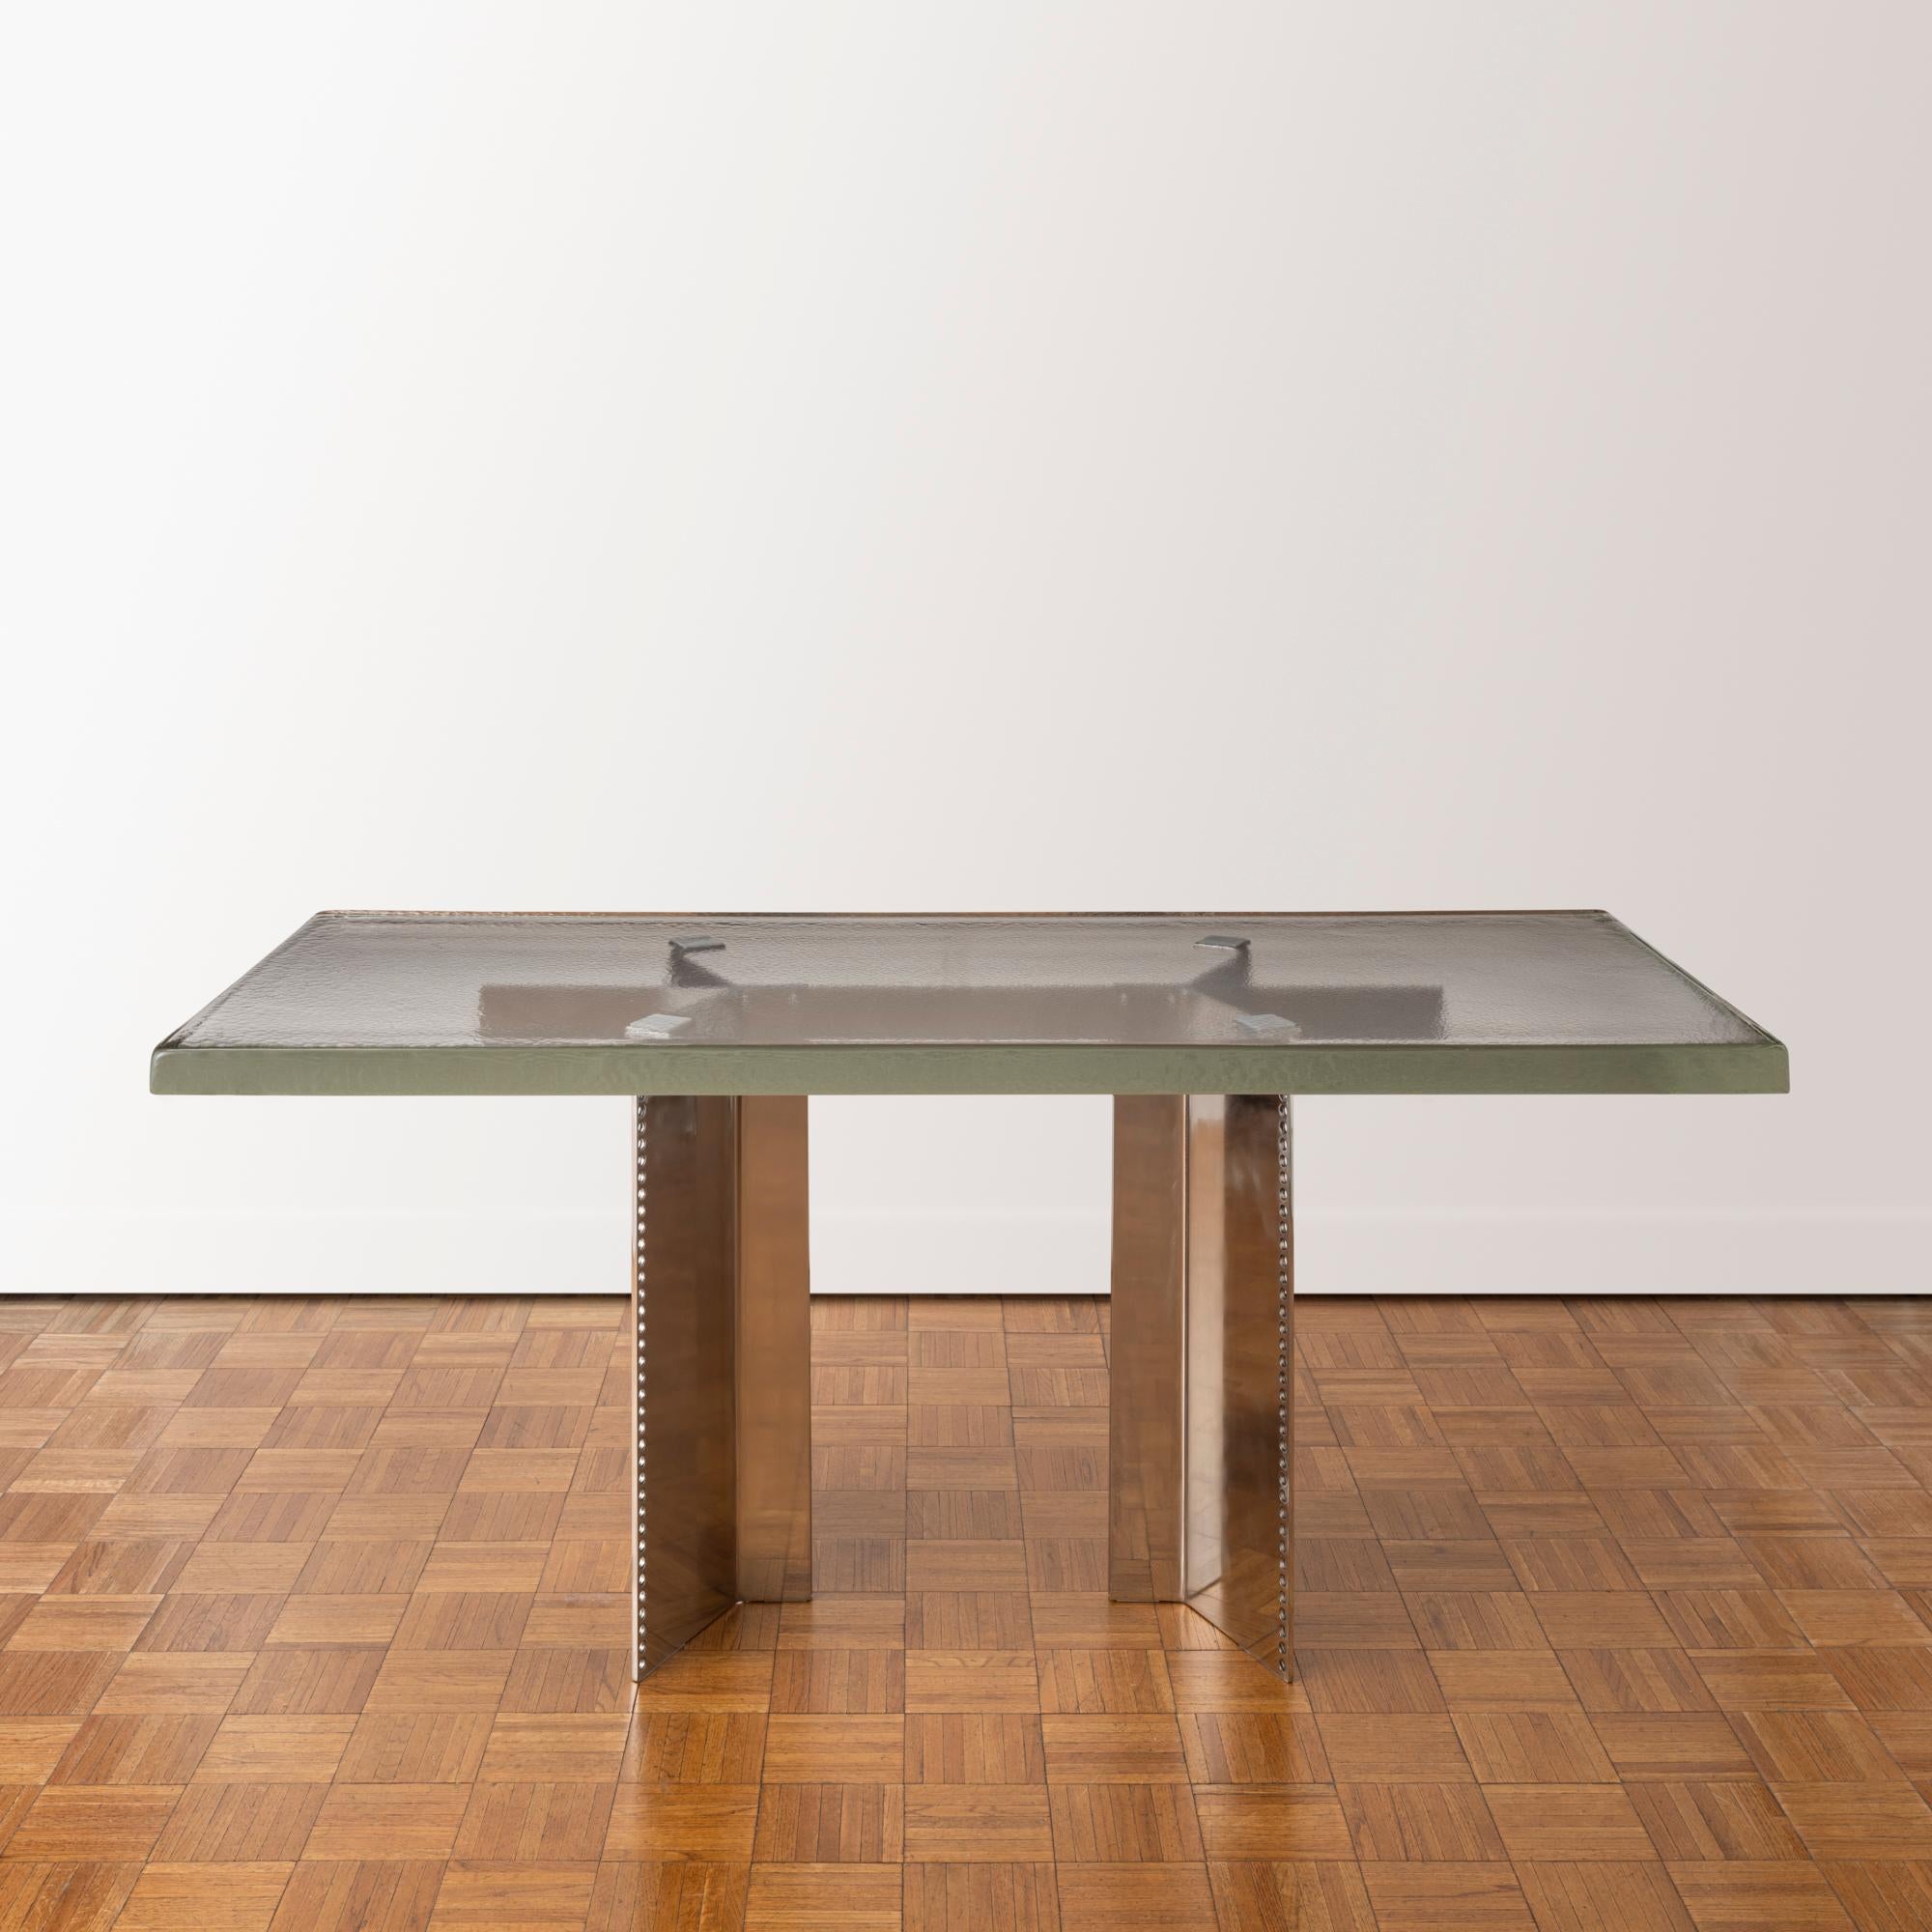 Contemporary dining table comprised of a rectangular glass slab atop an architectural base of perforated stainless steel pedestals joined by a stainless steel crossbar. The massive, two-inch thick glass top is produced by crucible casting, which